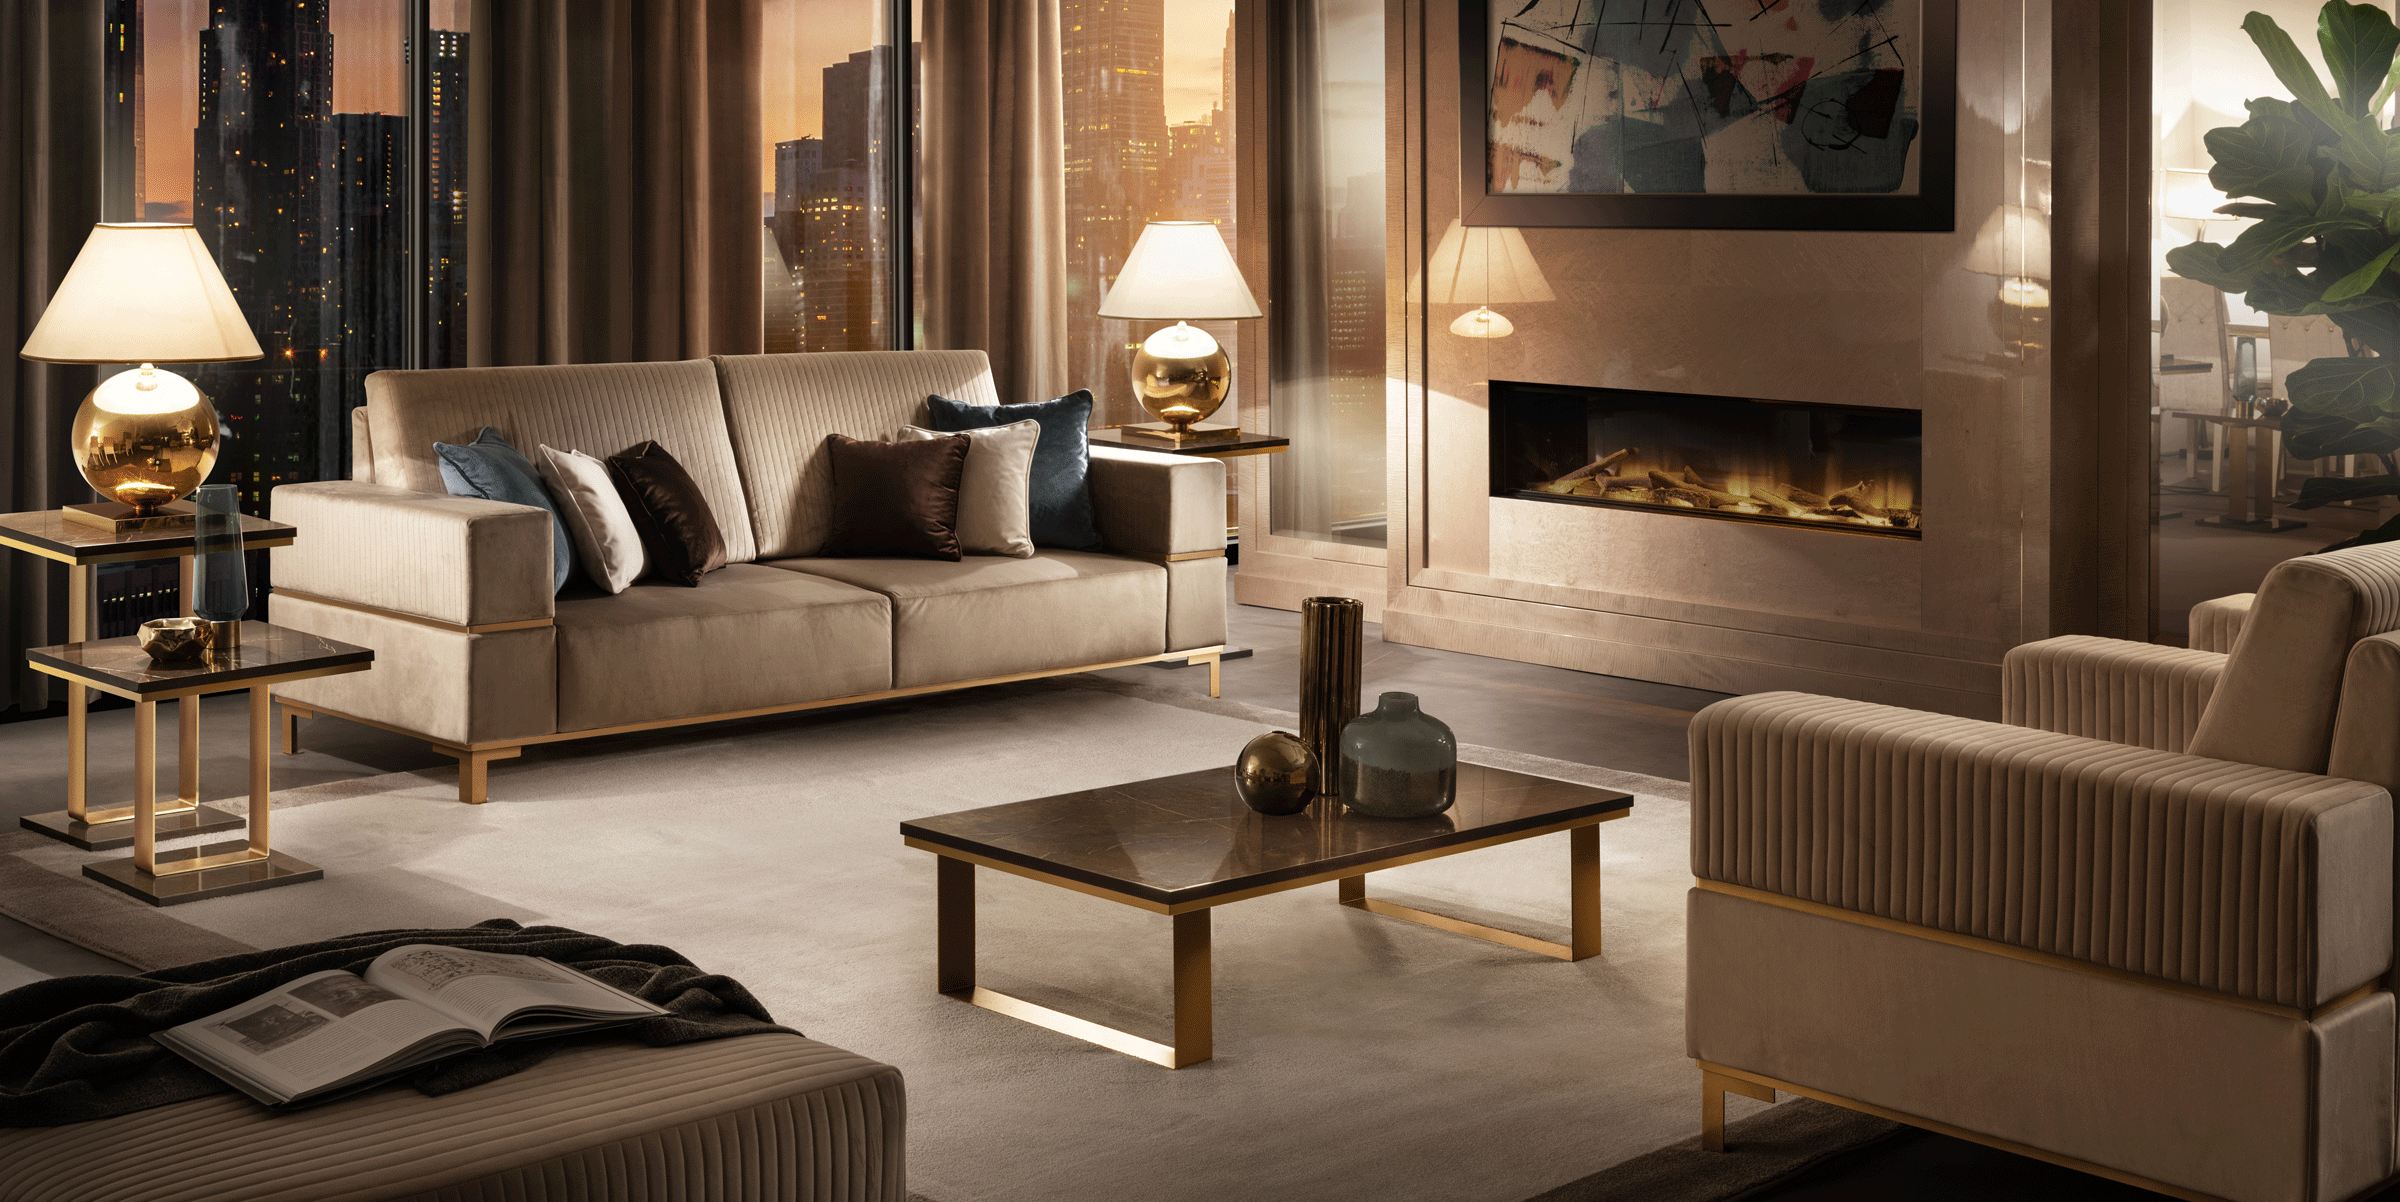 Living Room Furniture Sleepers Sofas Loveseats and Chairs Essenza Living by Arredoclassic, Italy